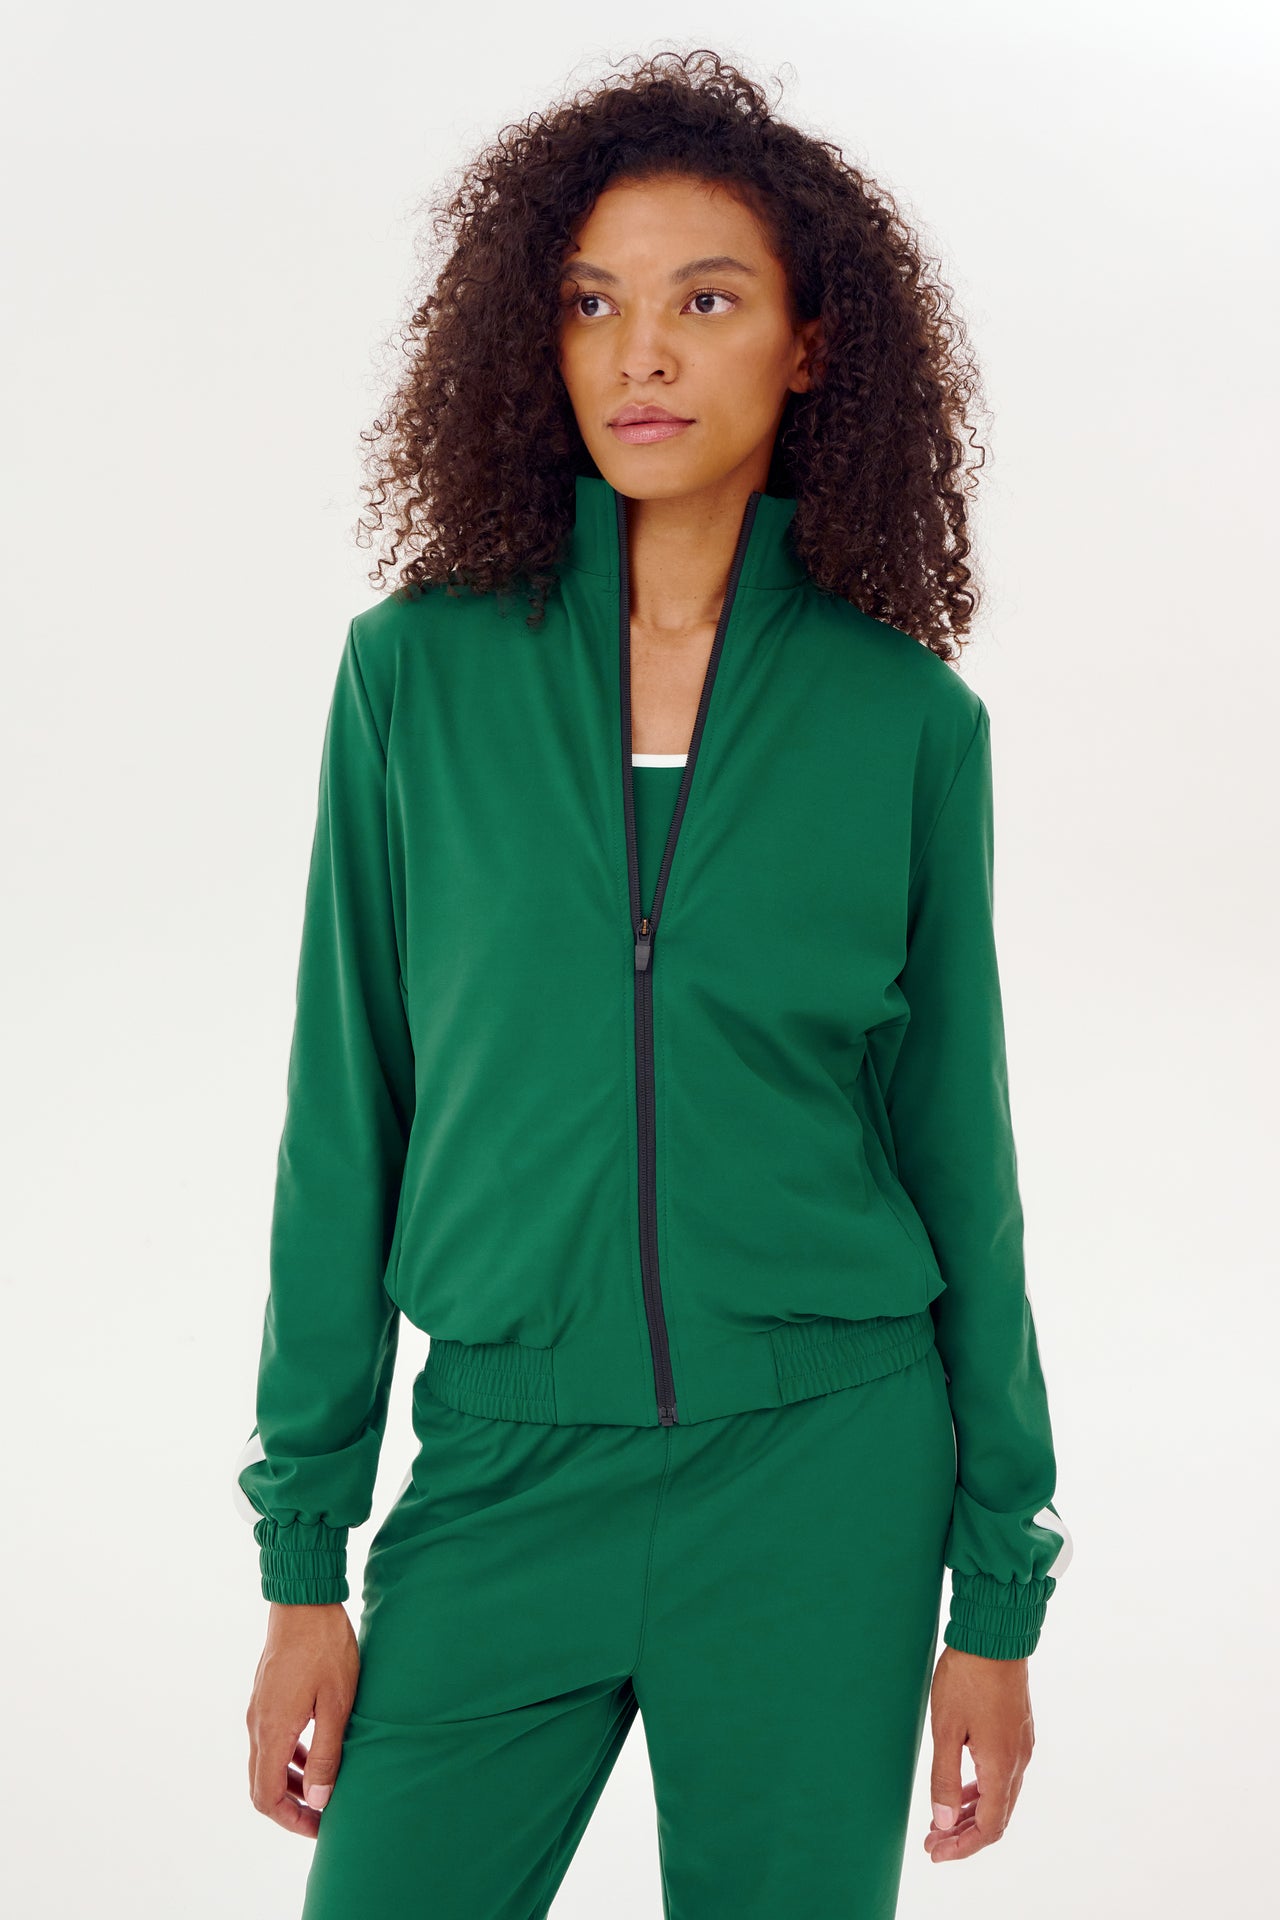 A woman warming up in a green Max Rigor track jacket and pants by SPLITS59.